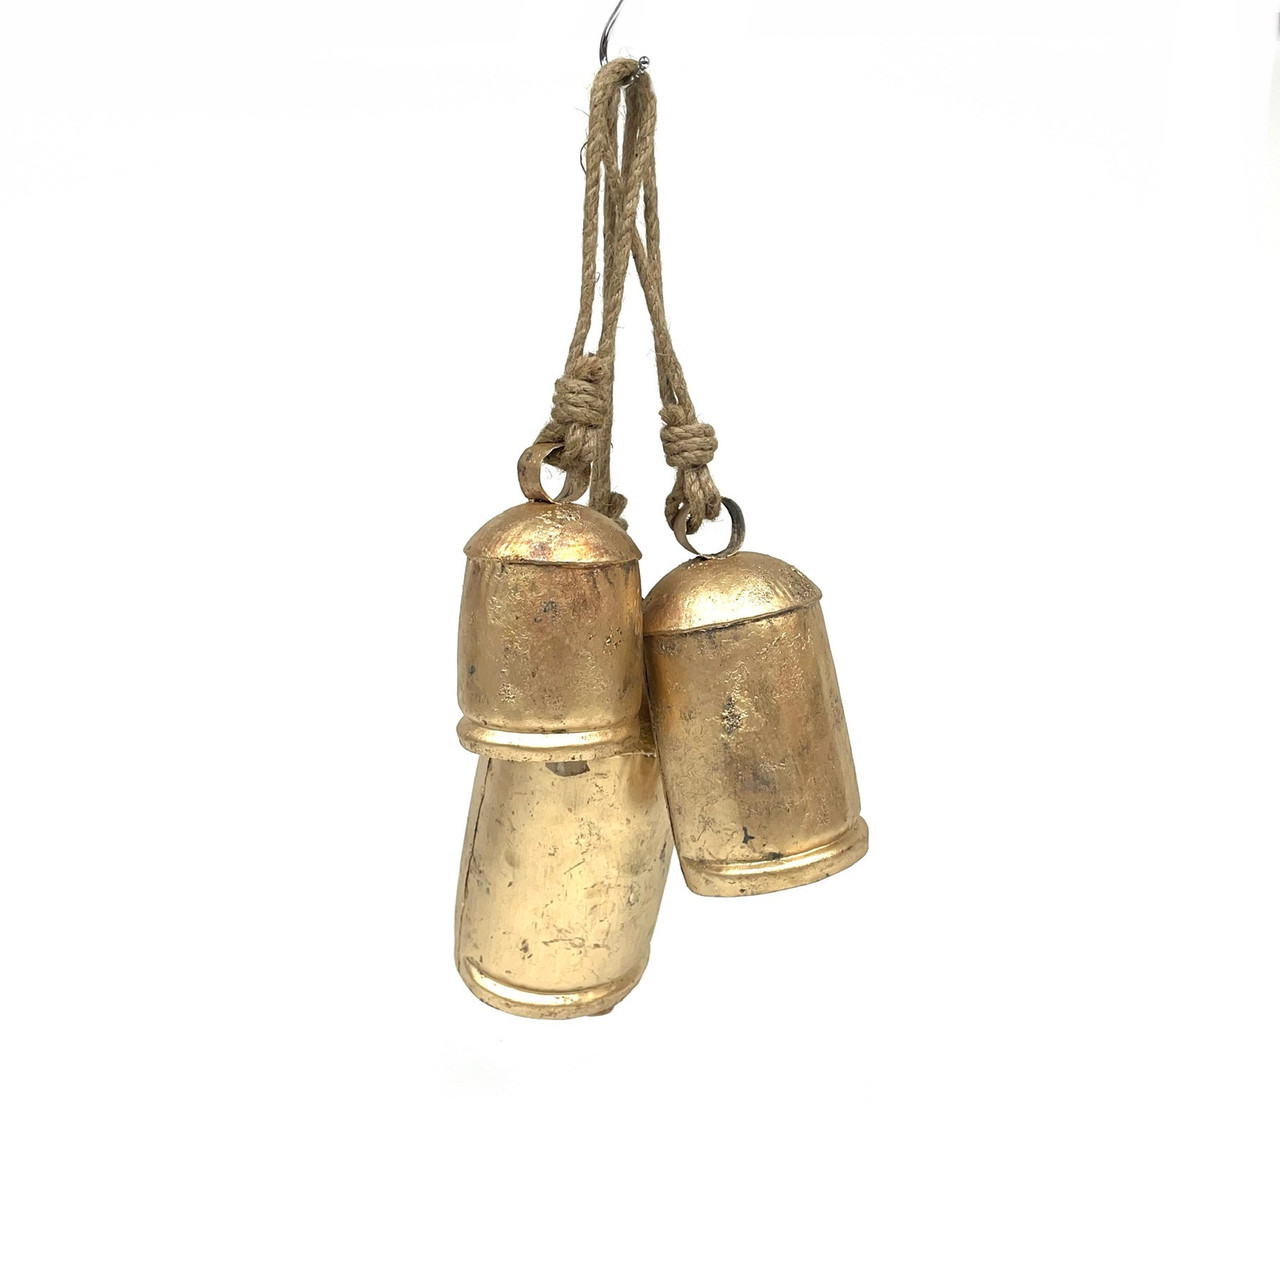 Rustic Cow Bells on Rope Set of 3 - 3, 4, 5 Tall - Paykoc Imports, Inc.